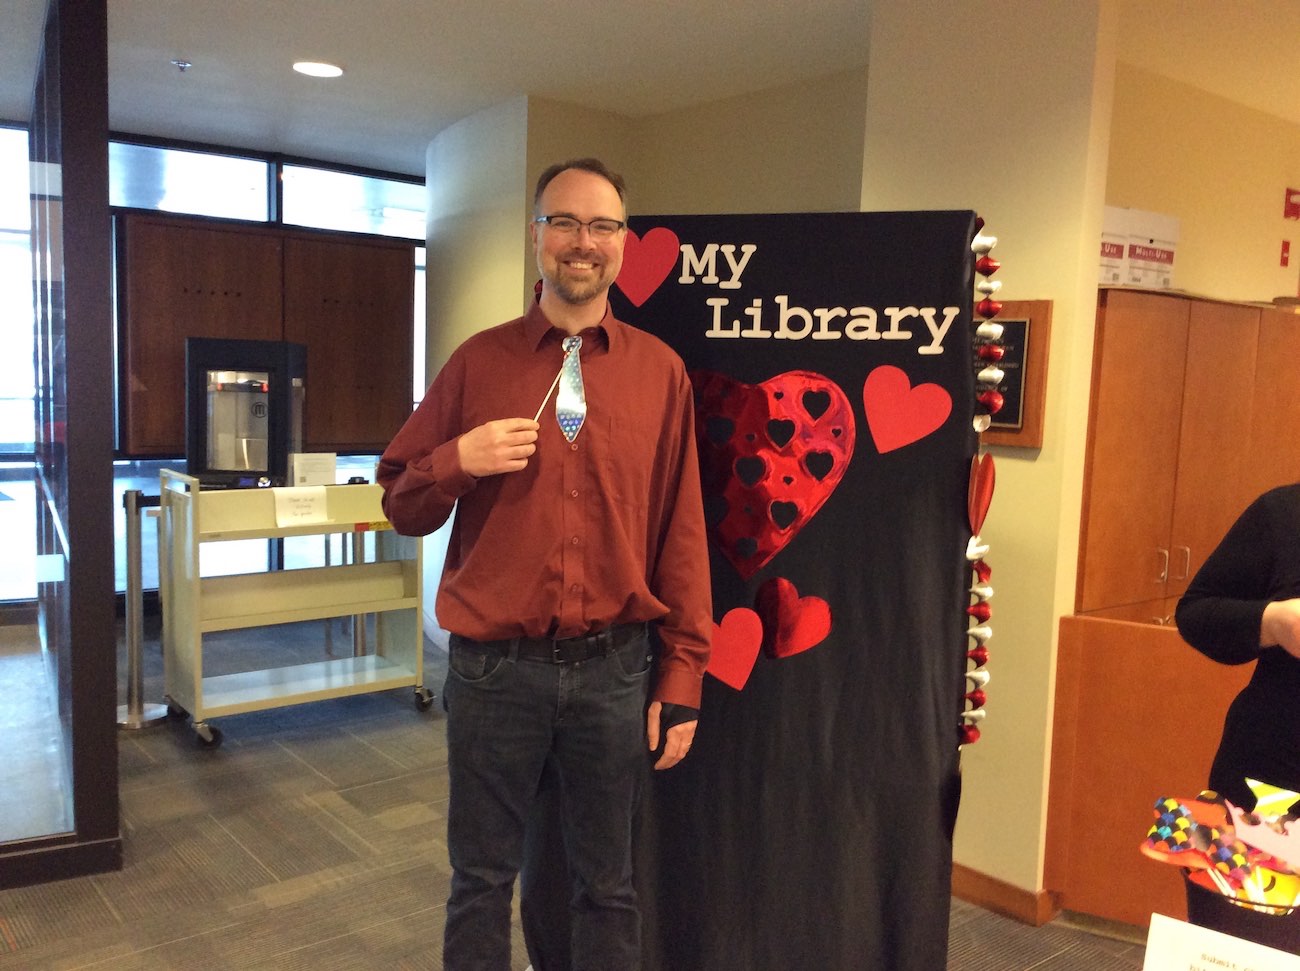 Student success librarian Brad Doerkerson stands in front of a black backdrop covered in red hearts and Love My Library across the top of it. He is holding up a prop necktie on a stick and smiling broadly.